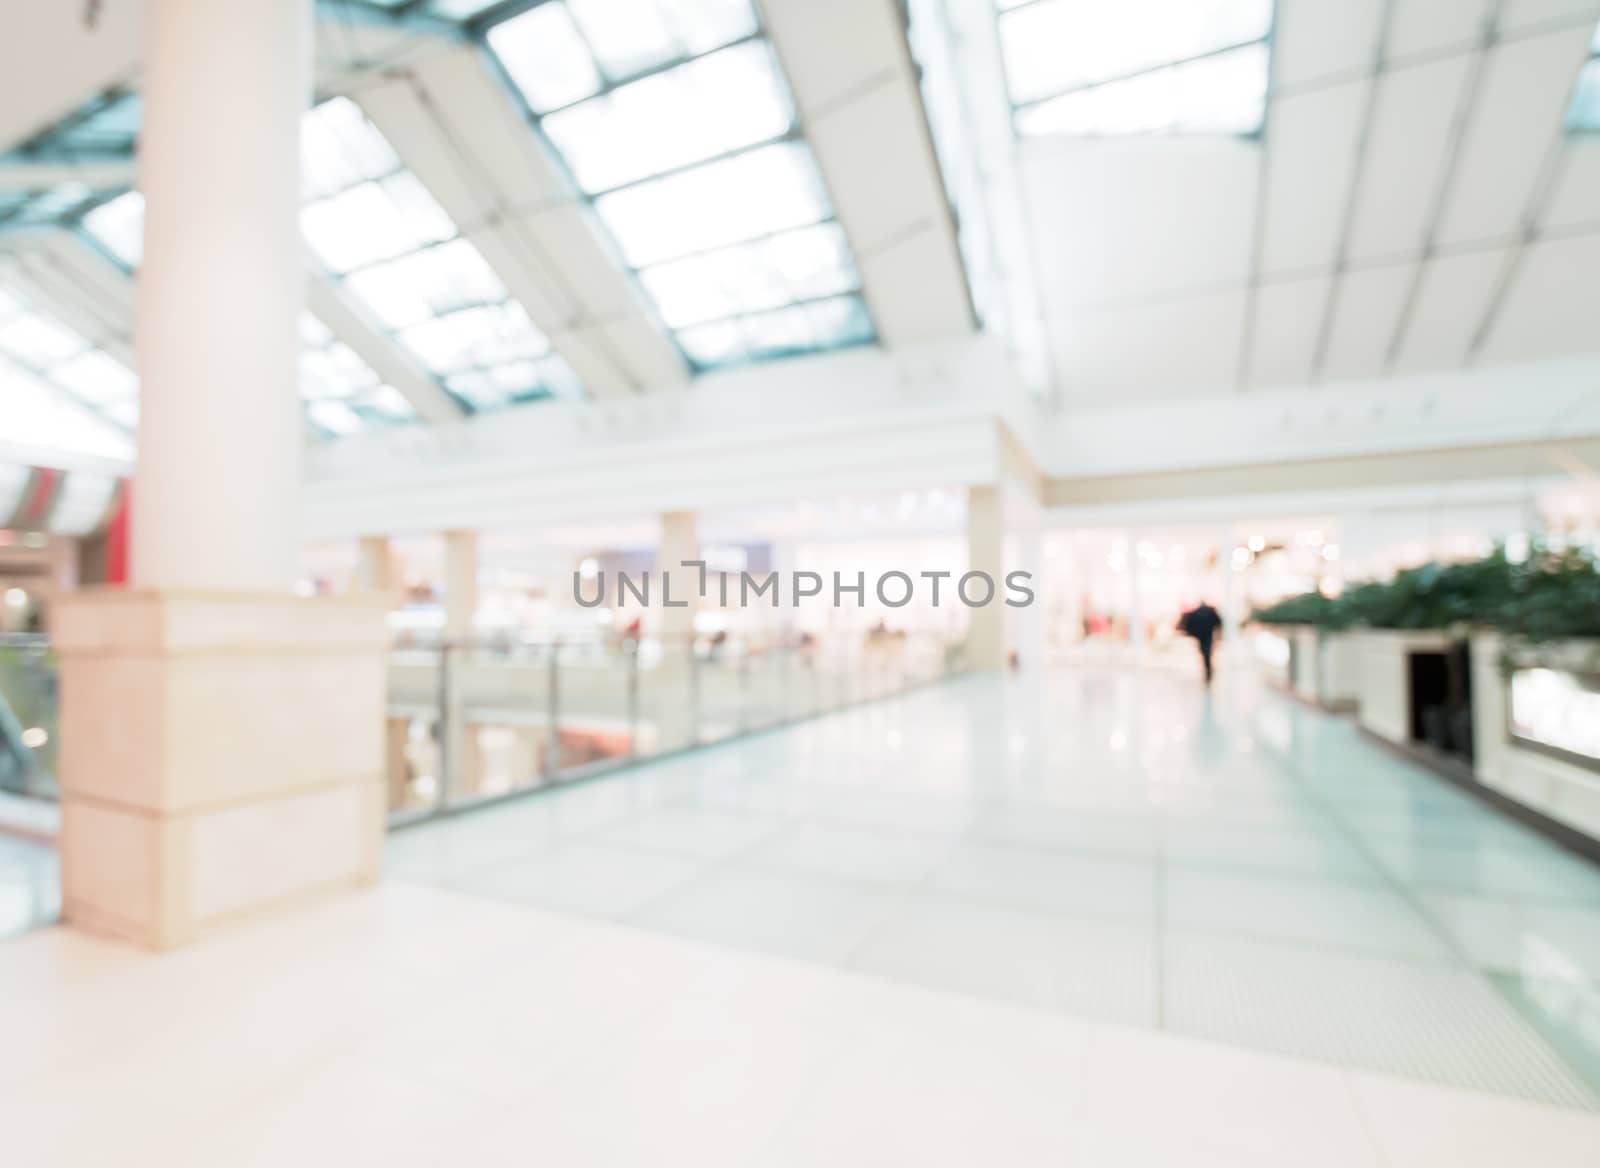 Shopping mall blur background with bokeh. Blurred hall of shopping mall with customers as background. Copy space